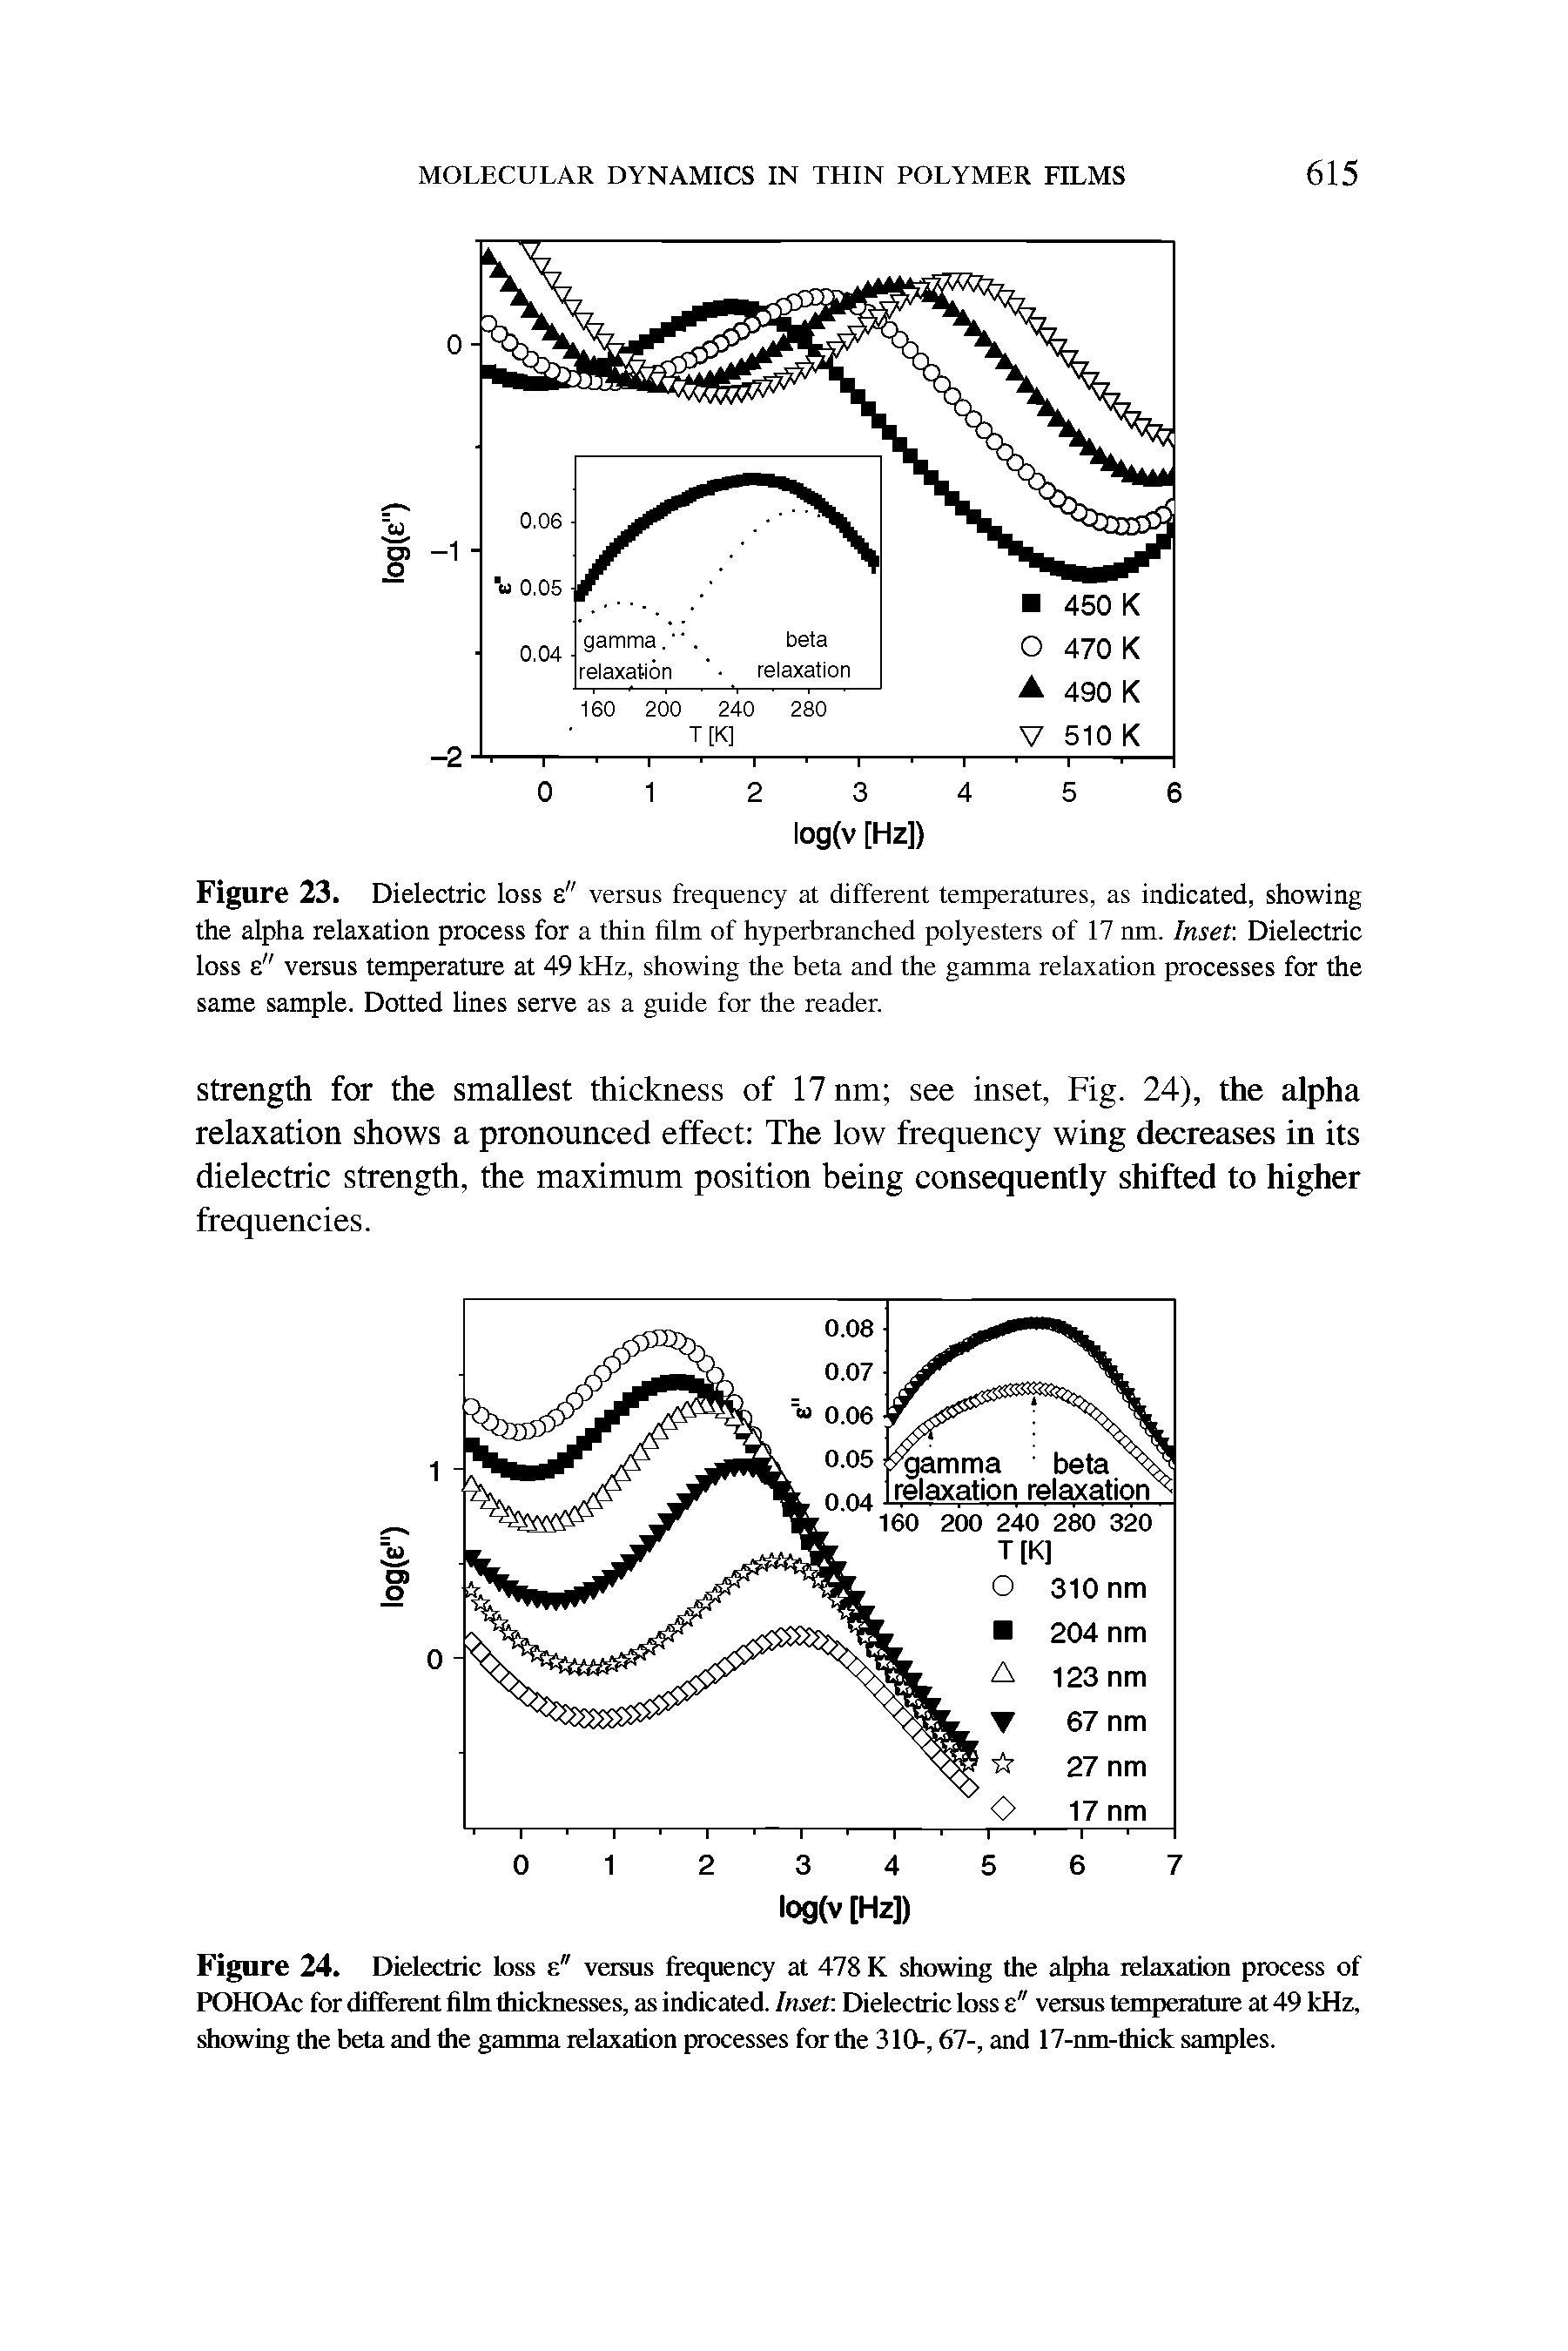 Figure 24. Dielectric loss e" versus frequency at 478 K showing the alpha relaxation process of POHOAc for different film thicknesses, as indicated. Inset. Dielectric loss s" versus temperature at 49 kHz, showing the beta and the gamma relaxation processes for the 310-, 67-, and 17-nm-1hick samples.